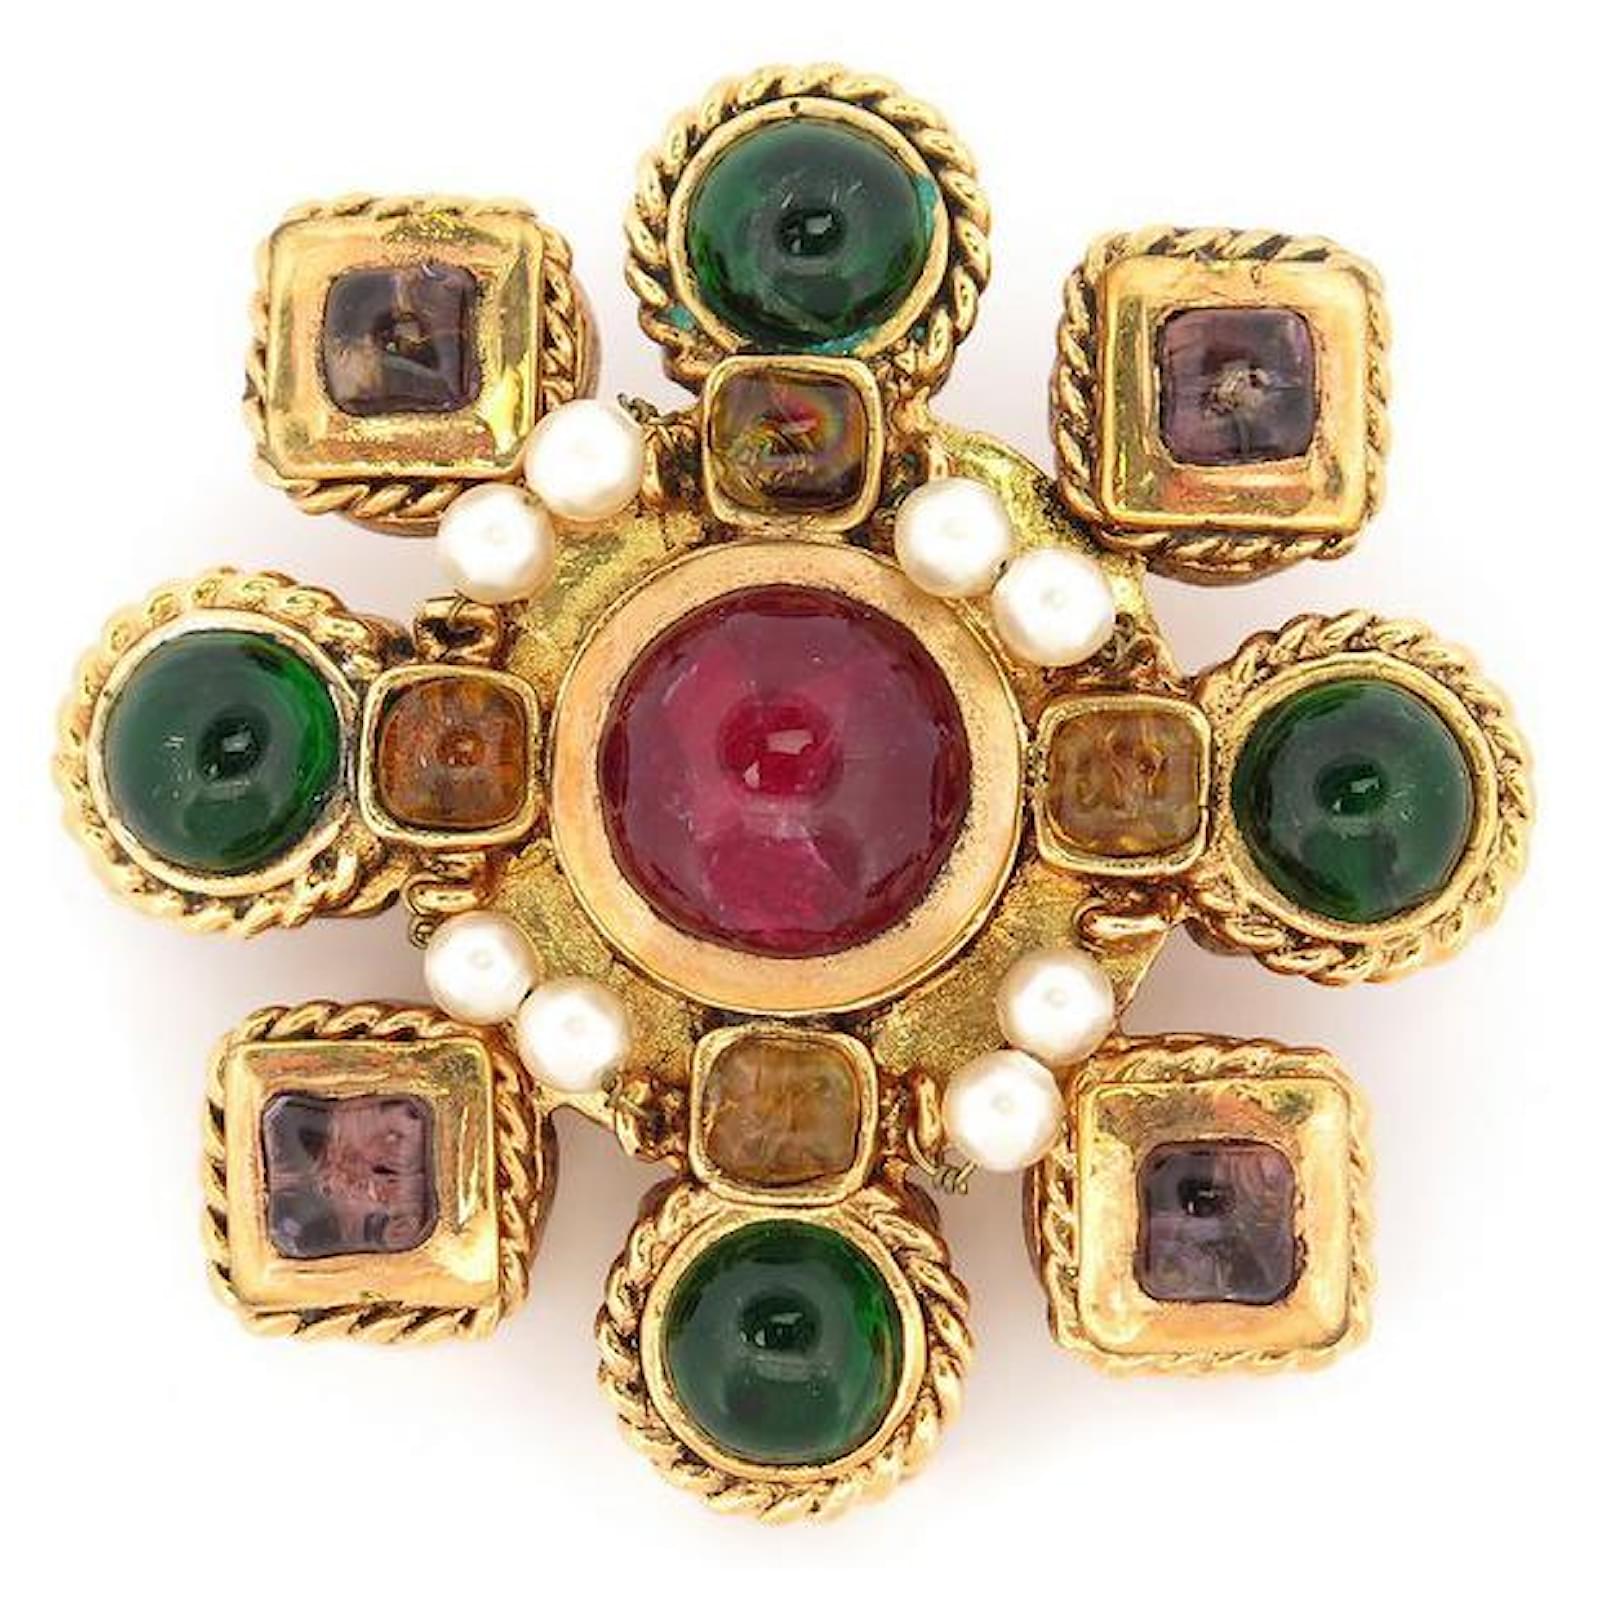 Other jewelry VINTAGE CHANEL GRIPOIX CIRCA BROOCH 1970 GLASS